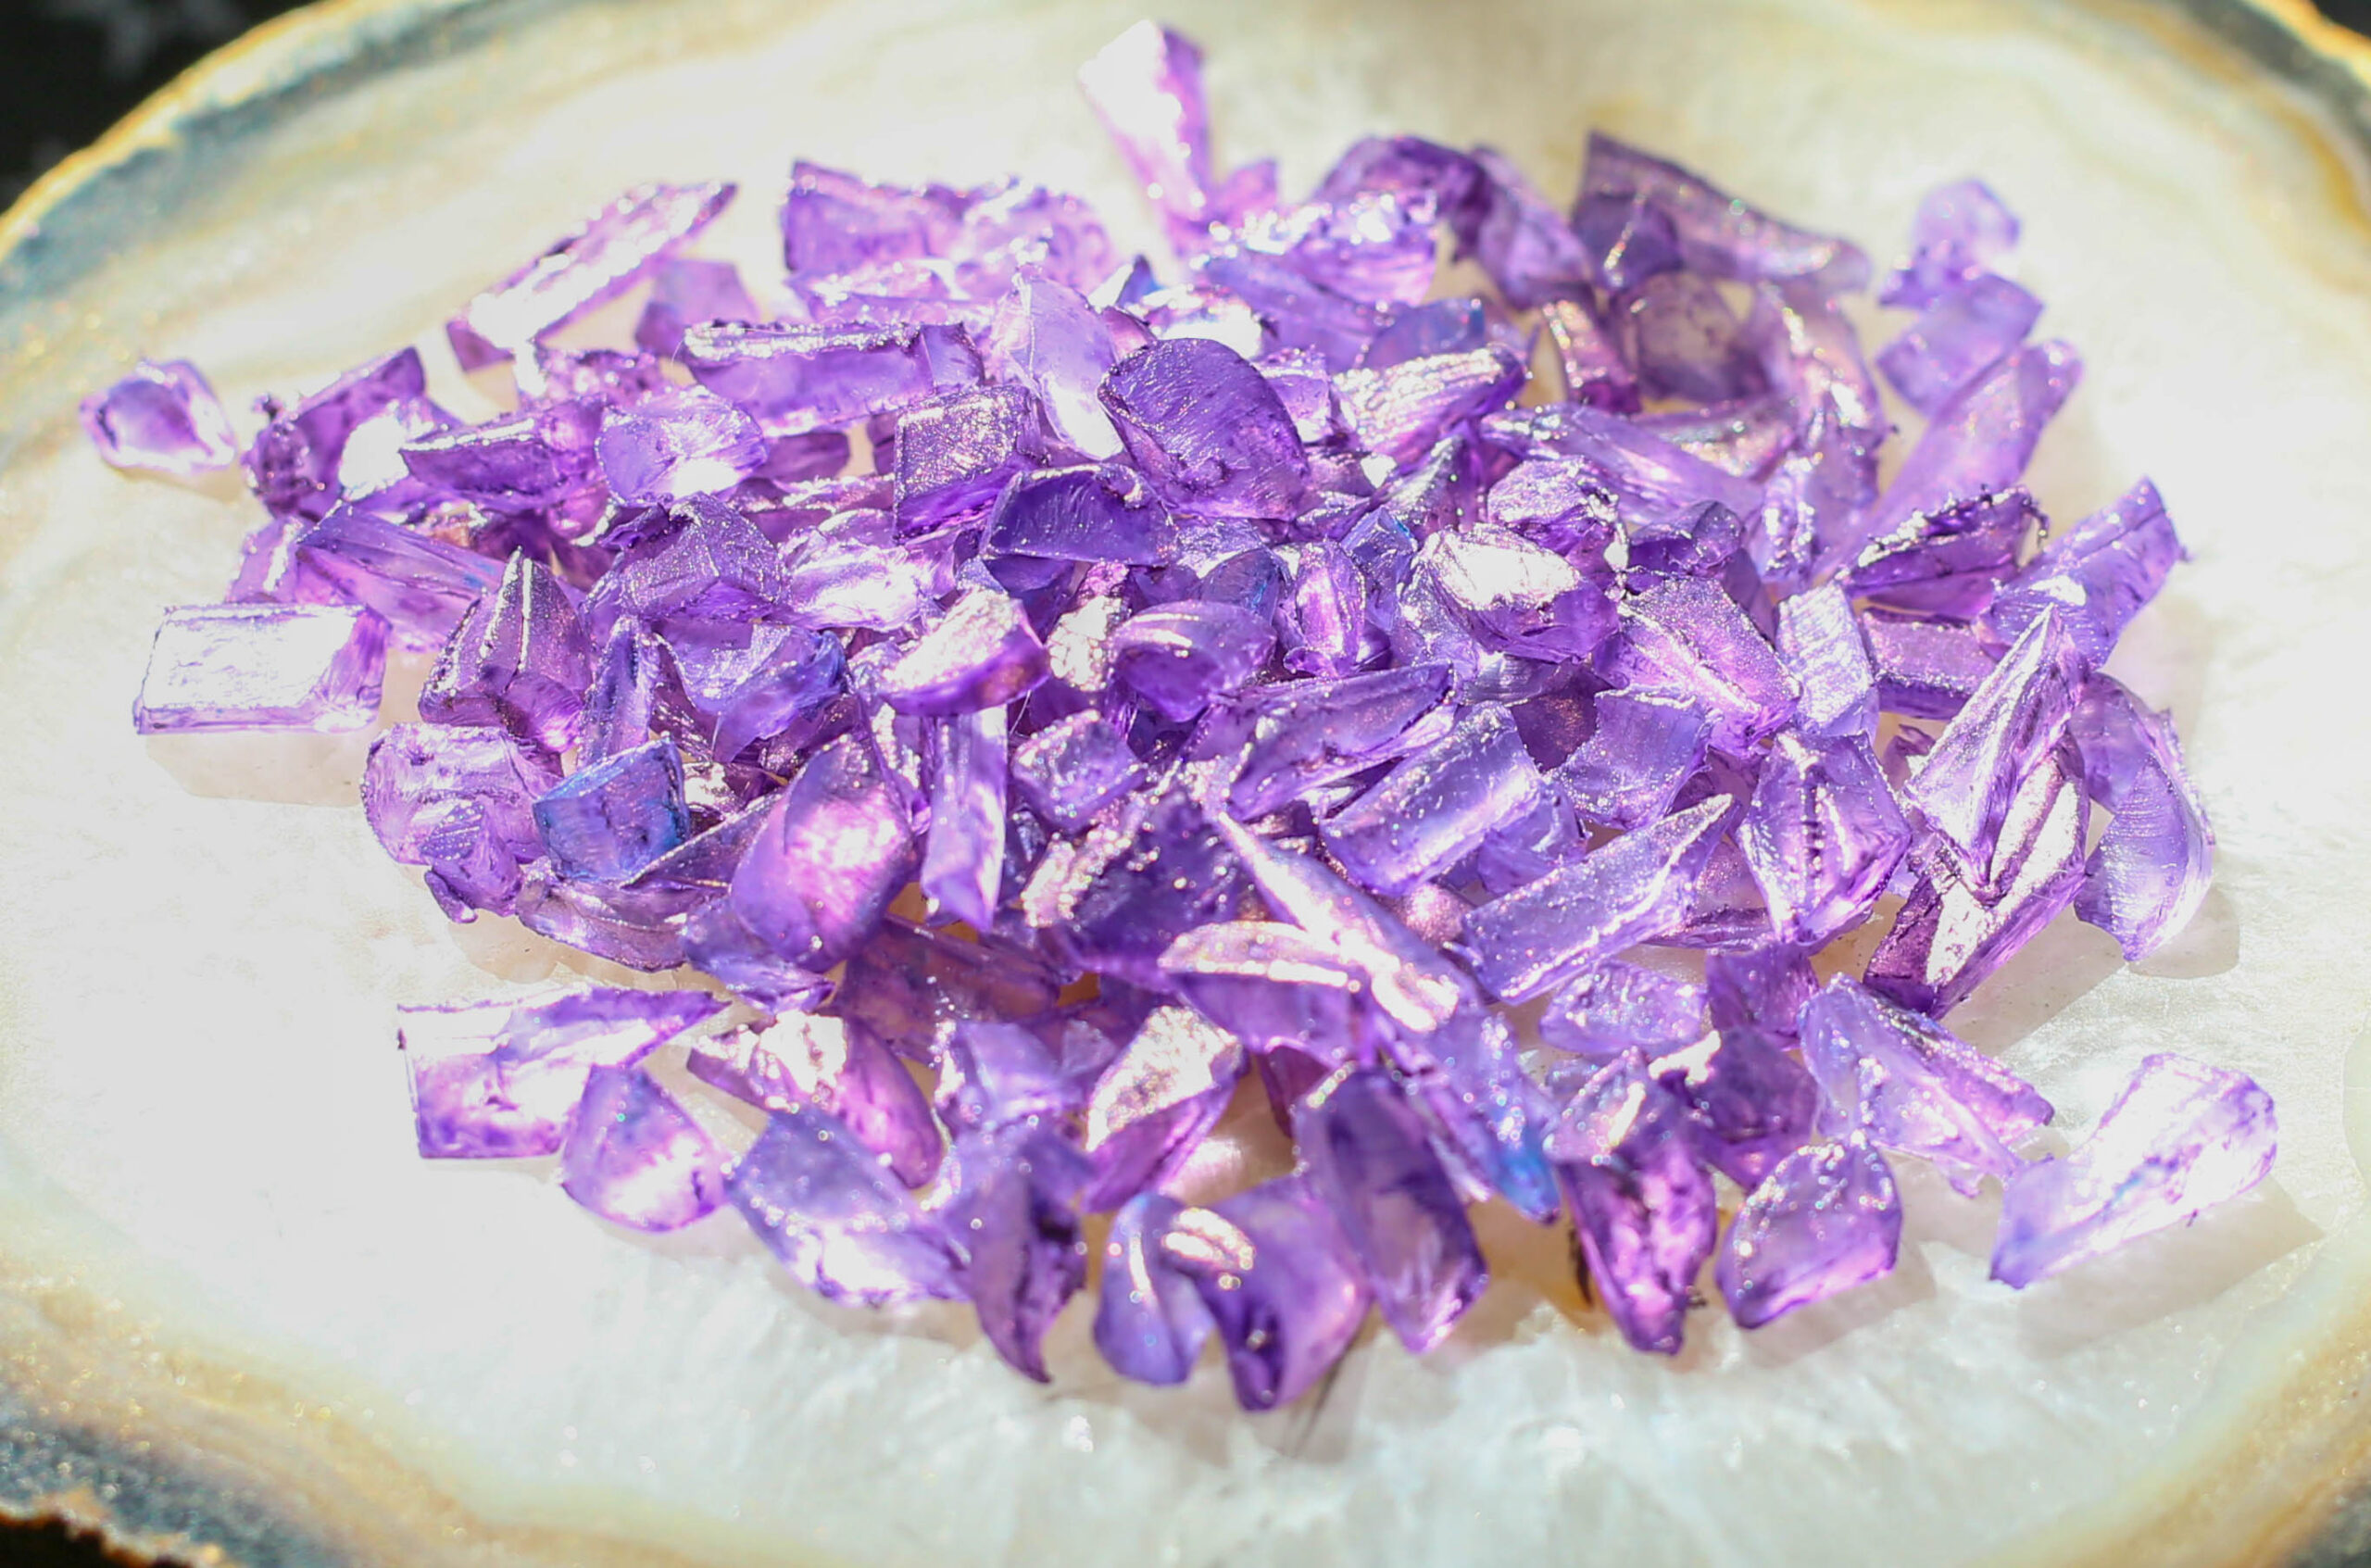 faux amethyst crystals made with FolkArt Color Shift Paint